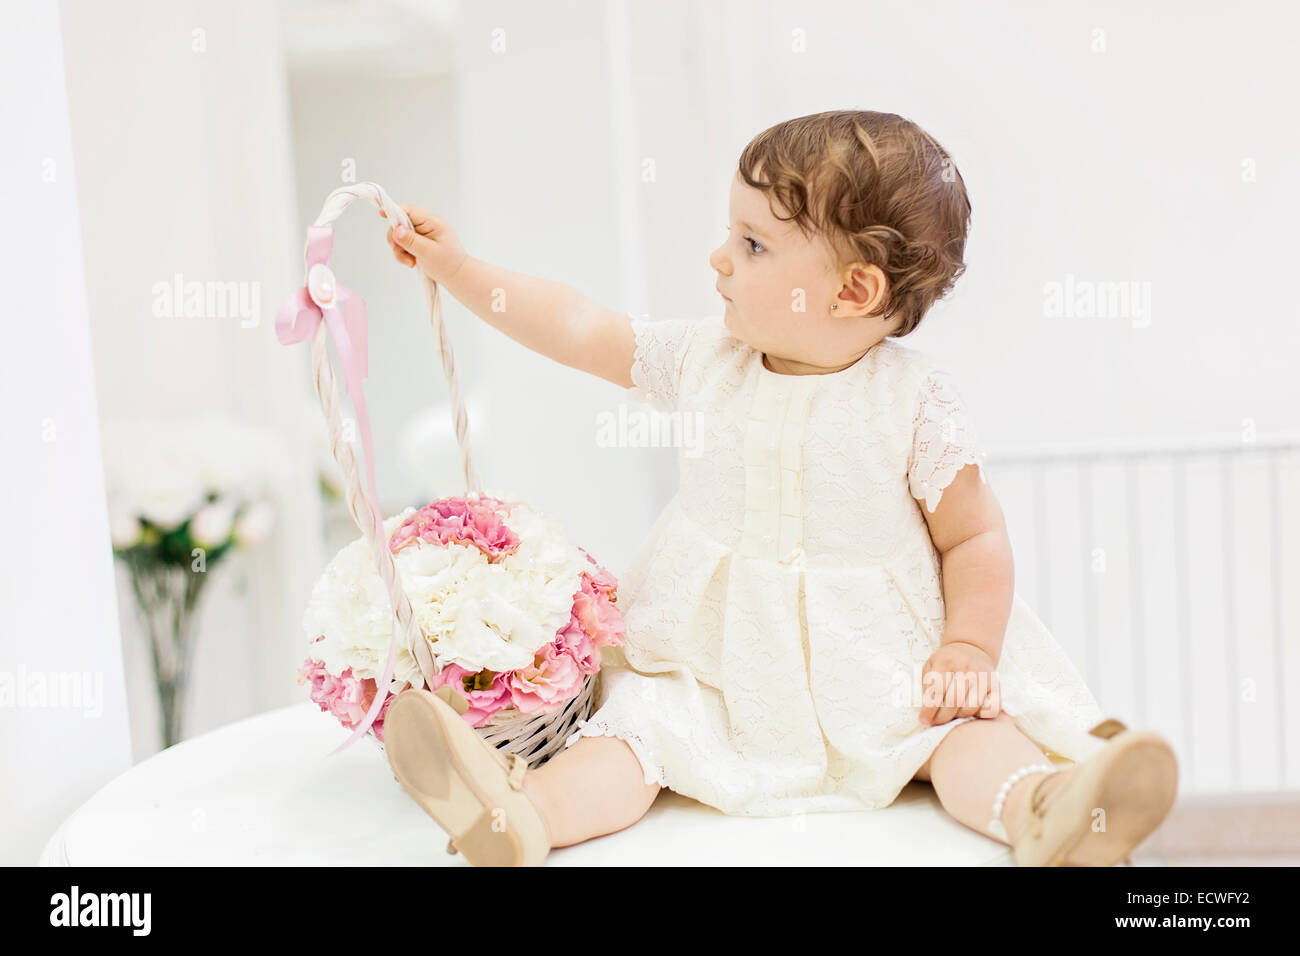 Cute baby with flower basket Stock Photo